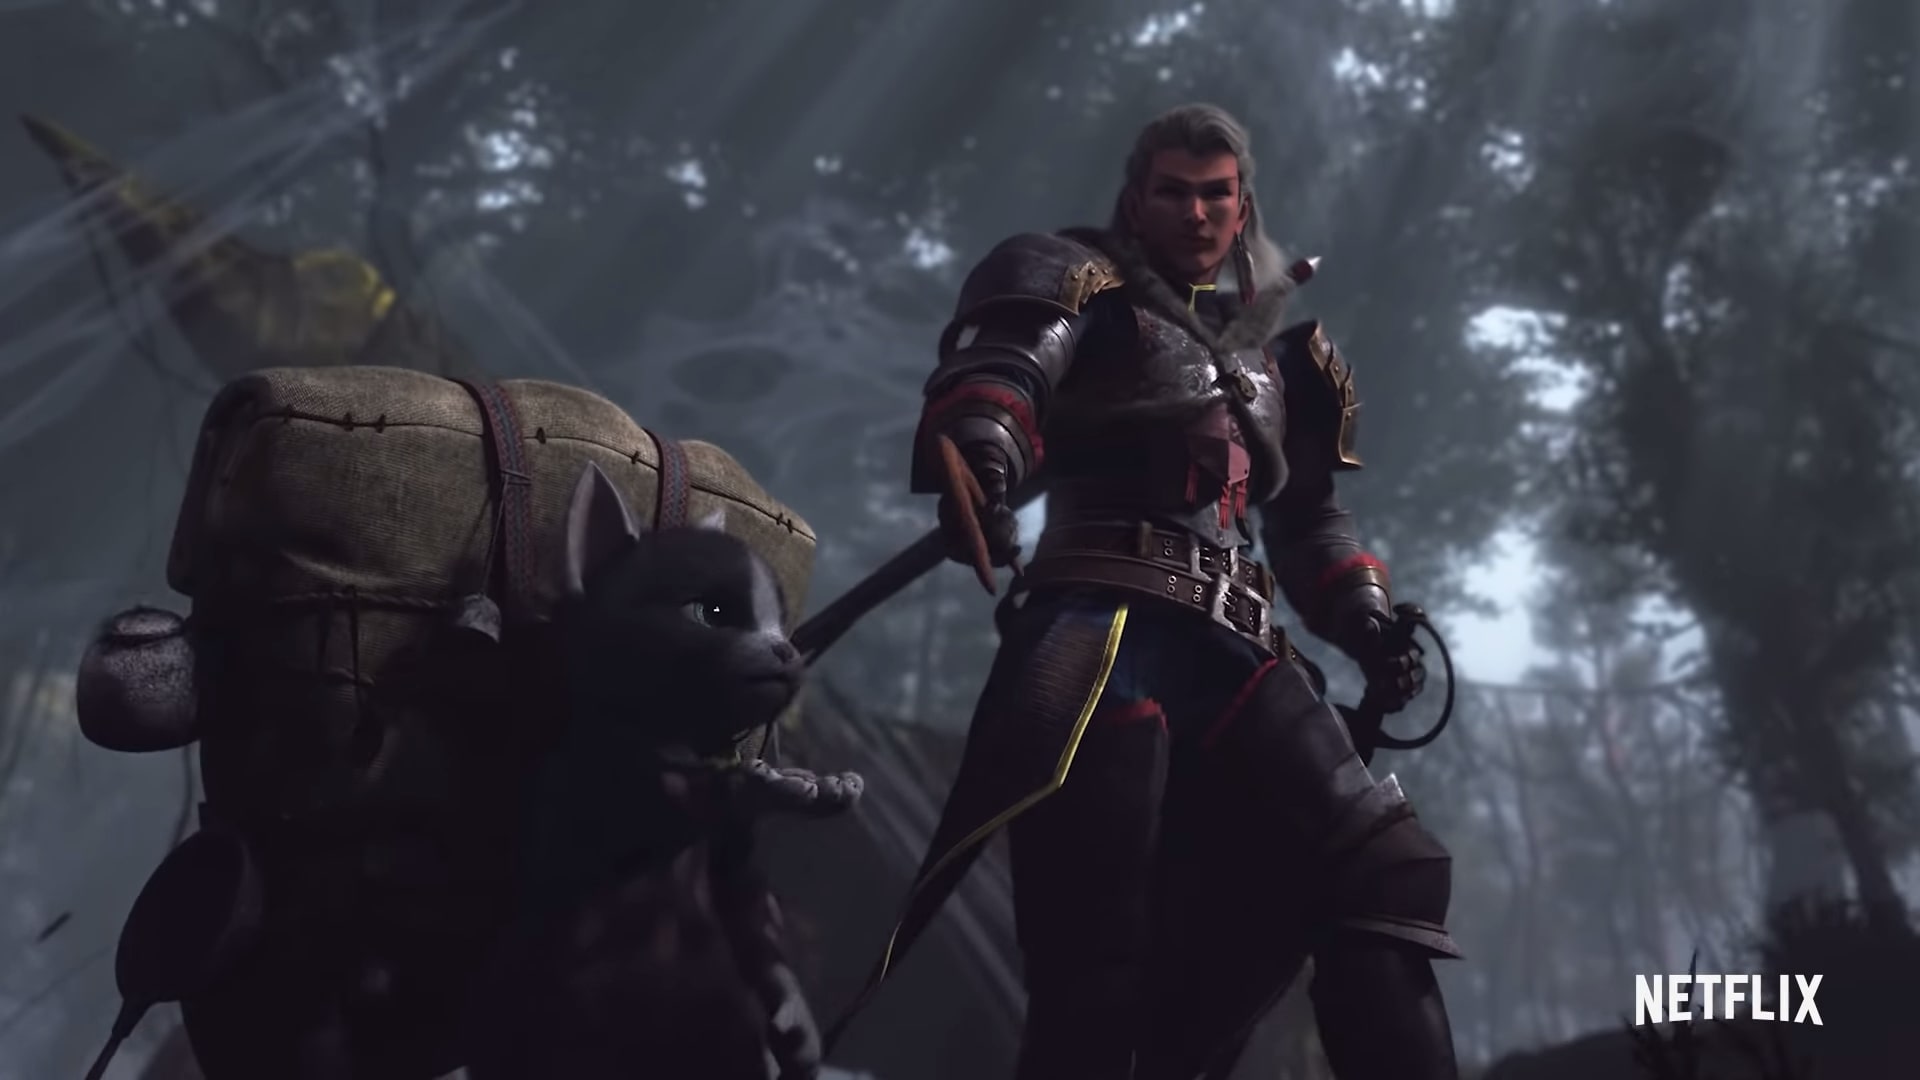 Netflix Monster Hunter Legends of the Guild Trailer, Coming to Netflix in August 2021